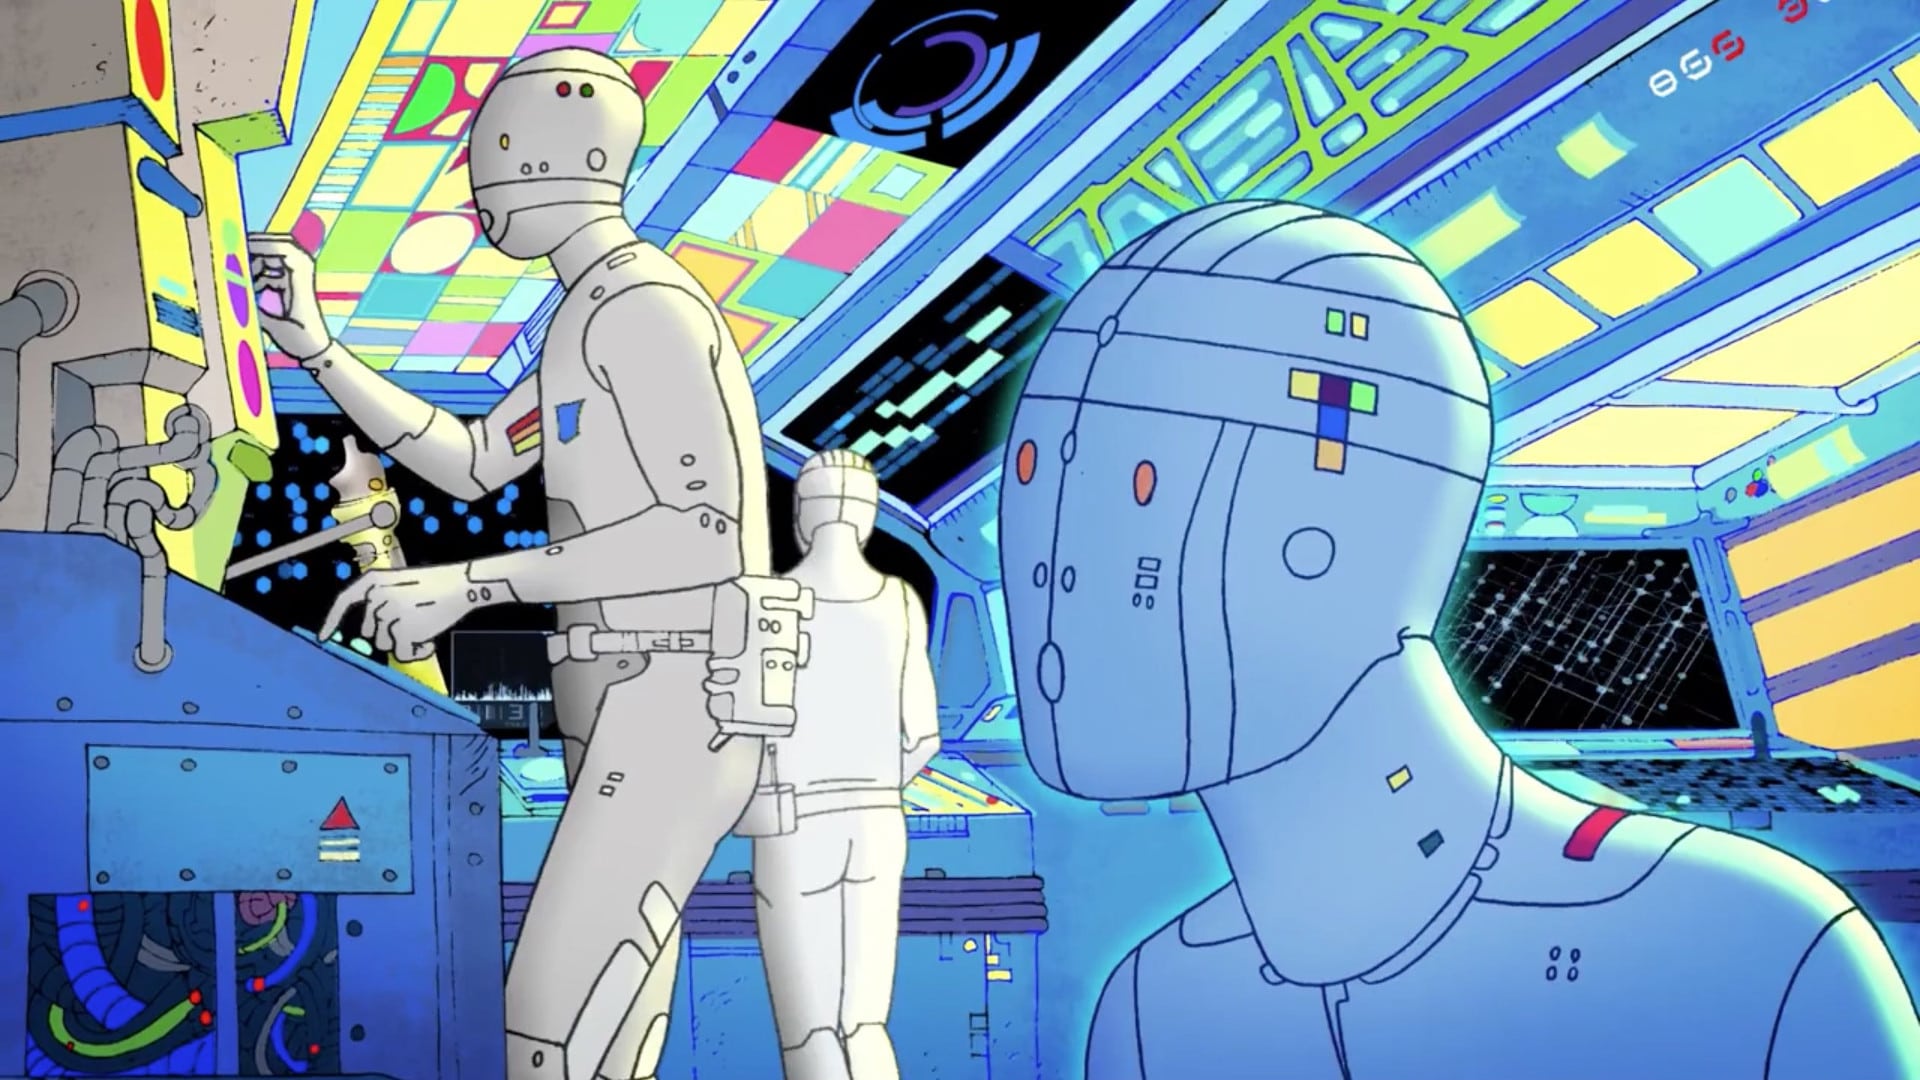 Here's a for Moebius & Jodorowsky's 'The Incal'